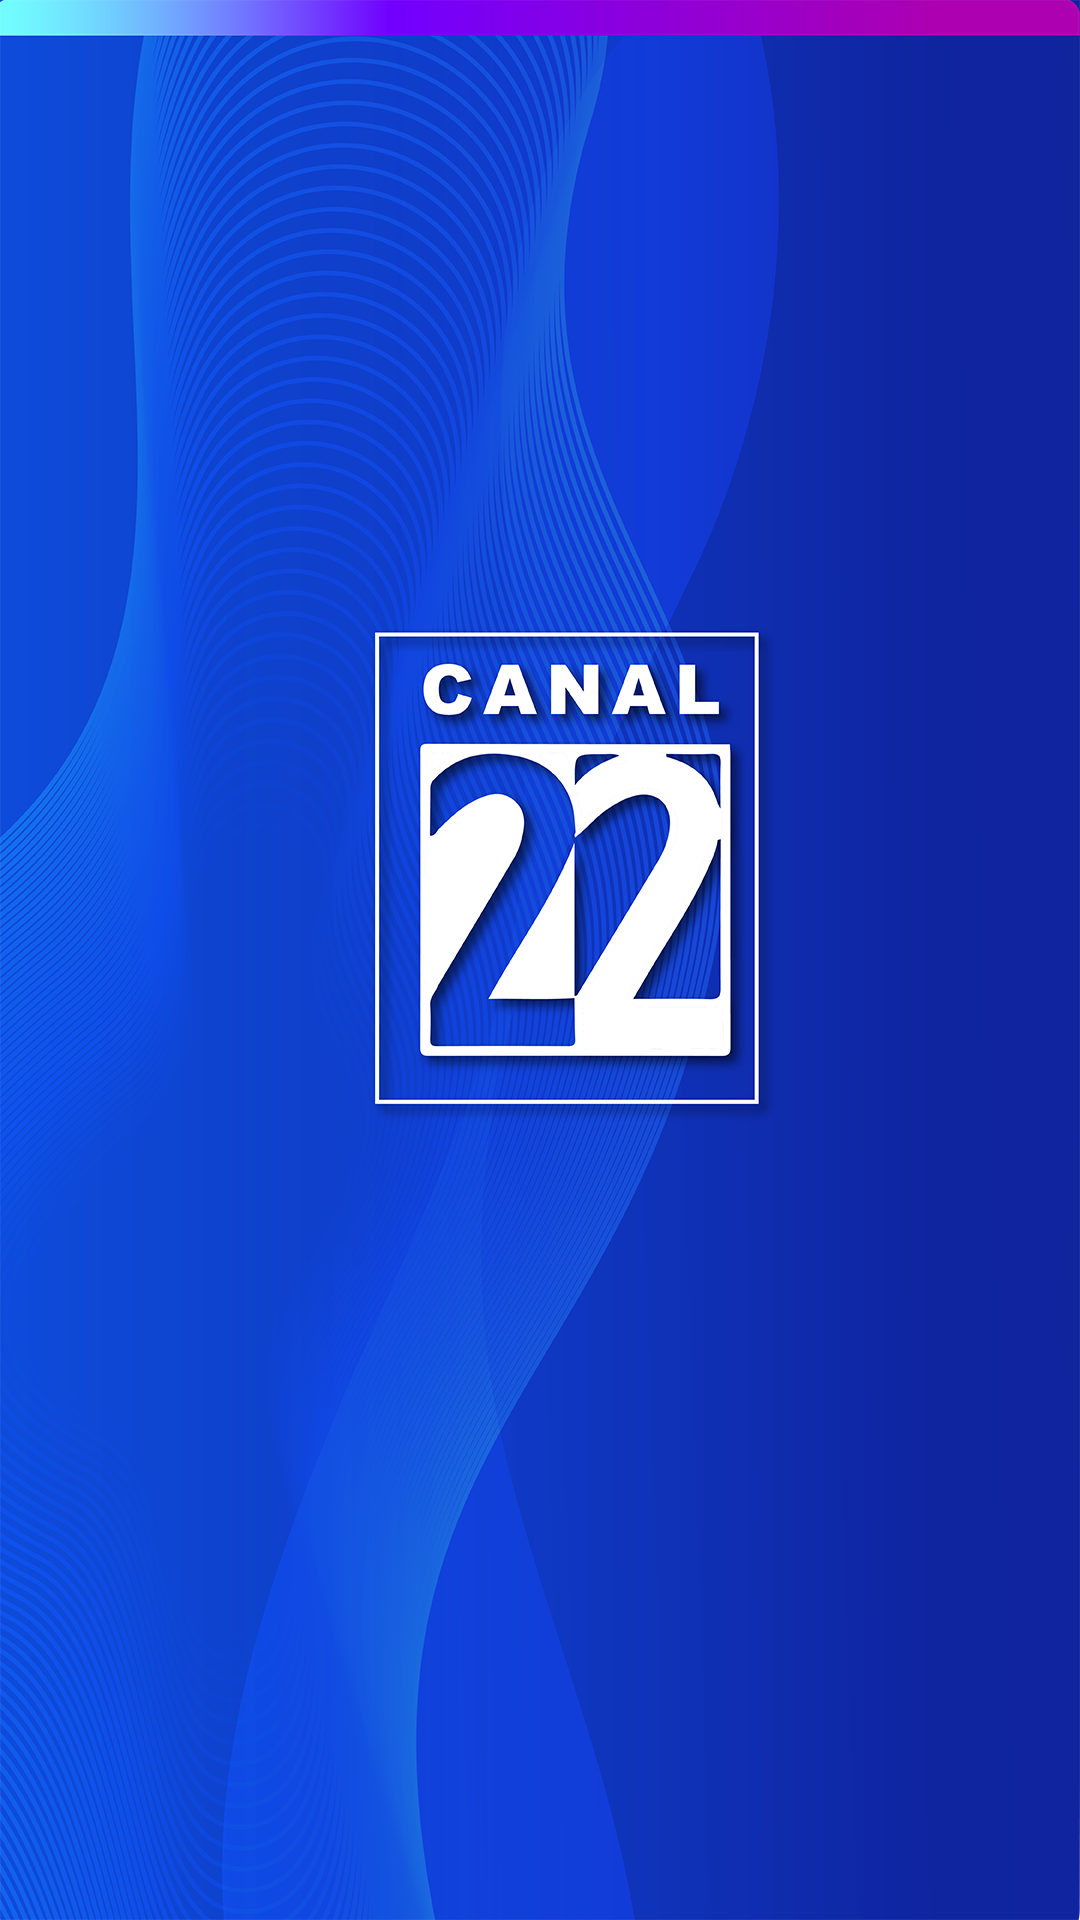 Canal 22